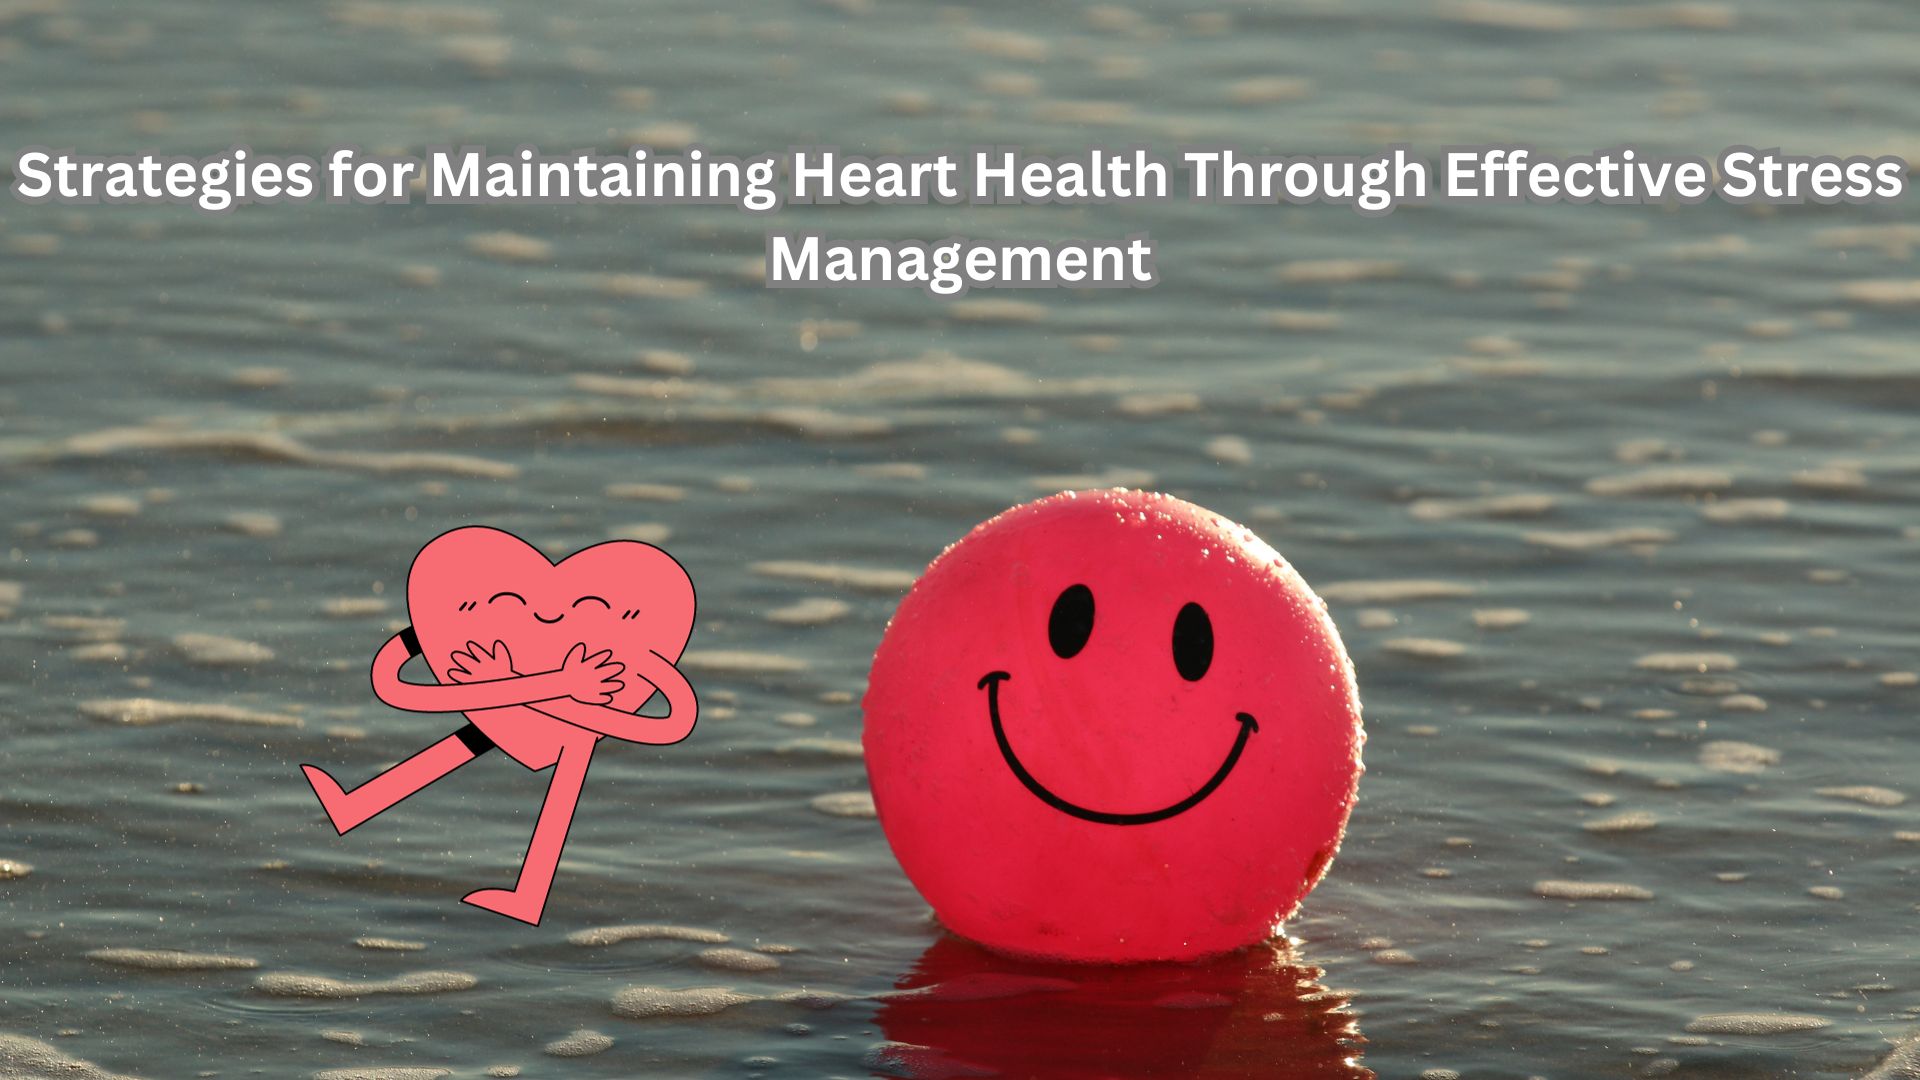 Strategies for Maintaining Heart Health Through Effective Stress Management